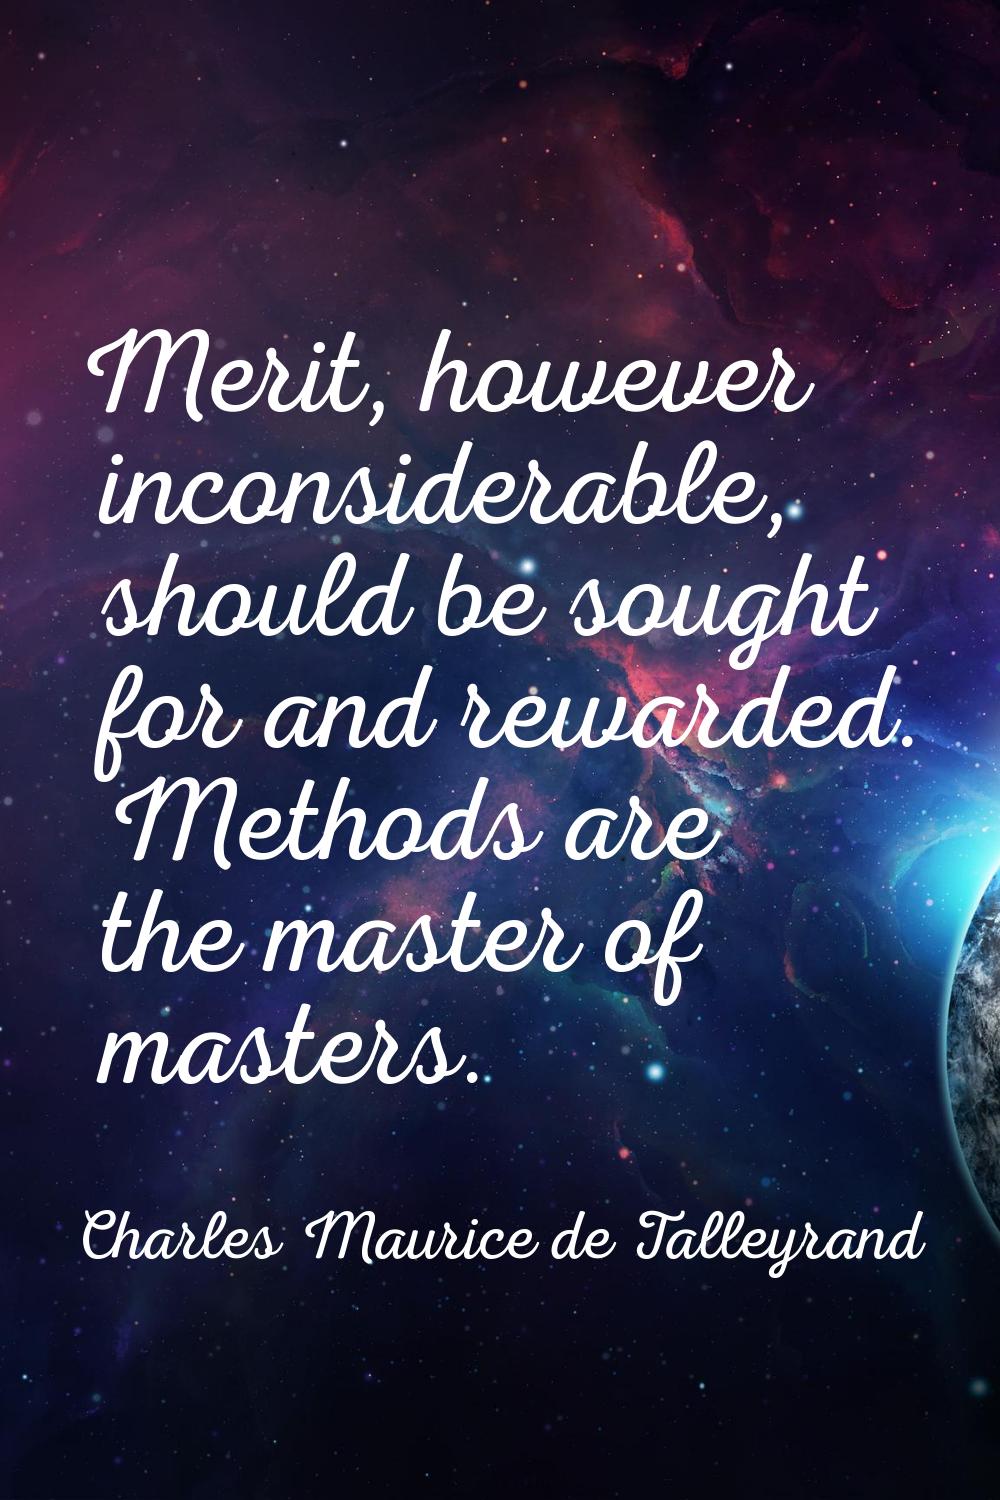 Merit, however inconsiderable, should be sought for and rewarded. Methods are the master of masters